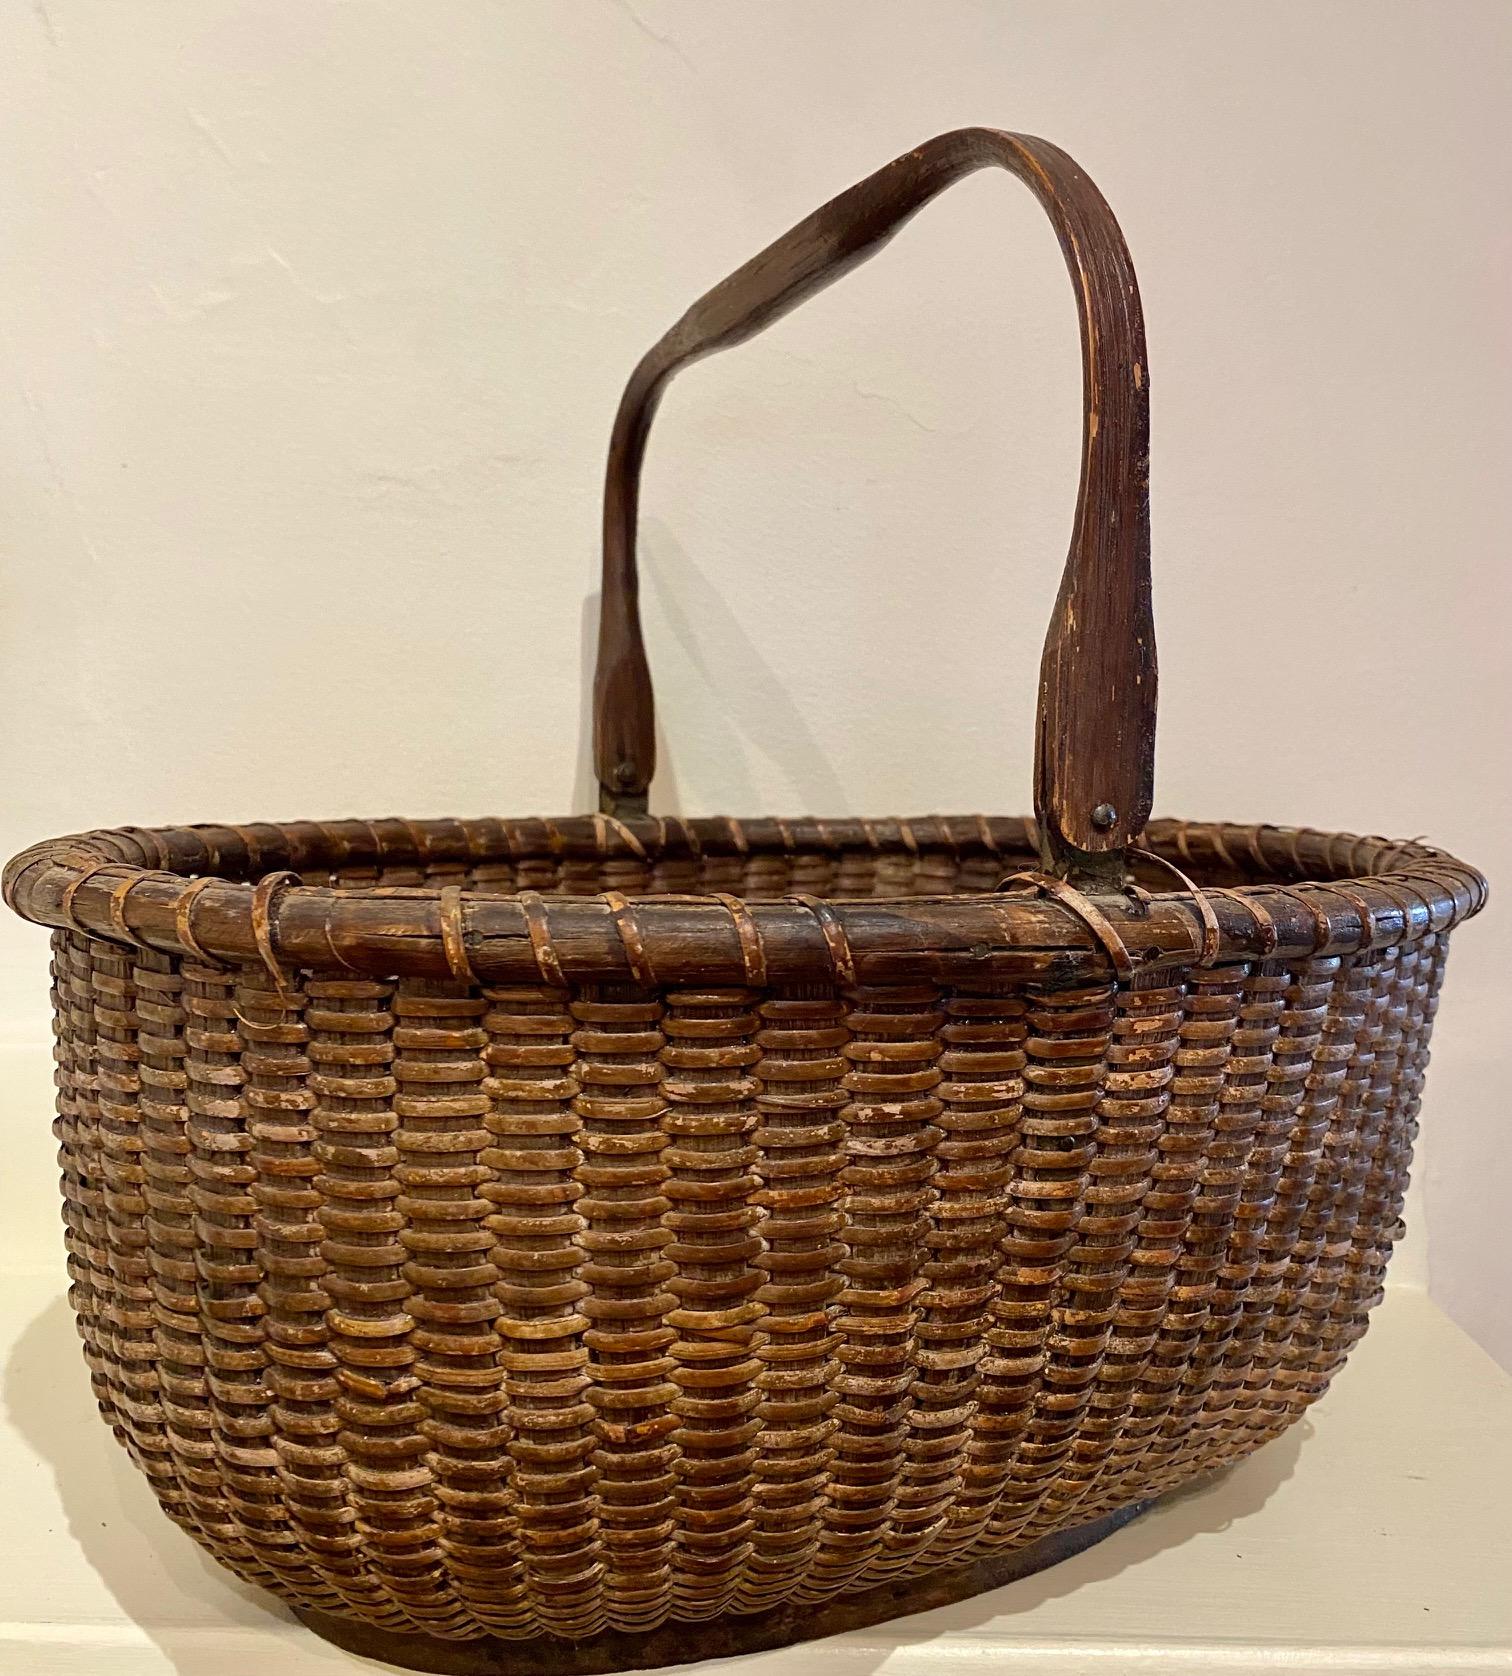 Late 19th century nantucket basket, by Mitchy Ray (1877 - 1956), circa 1920s, a large open oval basket with heavy rattan staves, cane weave, solid oak bottom plate and carved swing handle attached to fairly long metal ears. The basket is unsigned